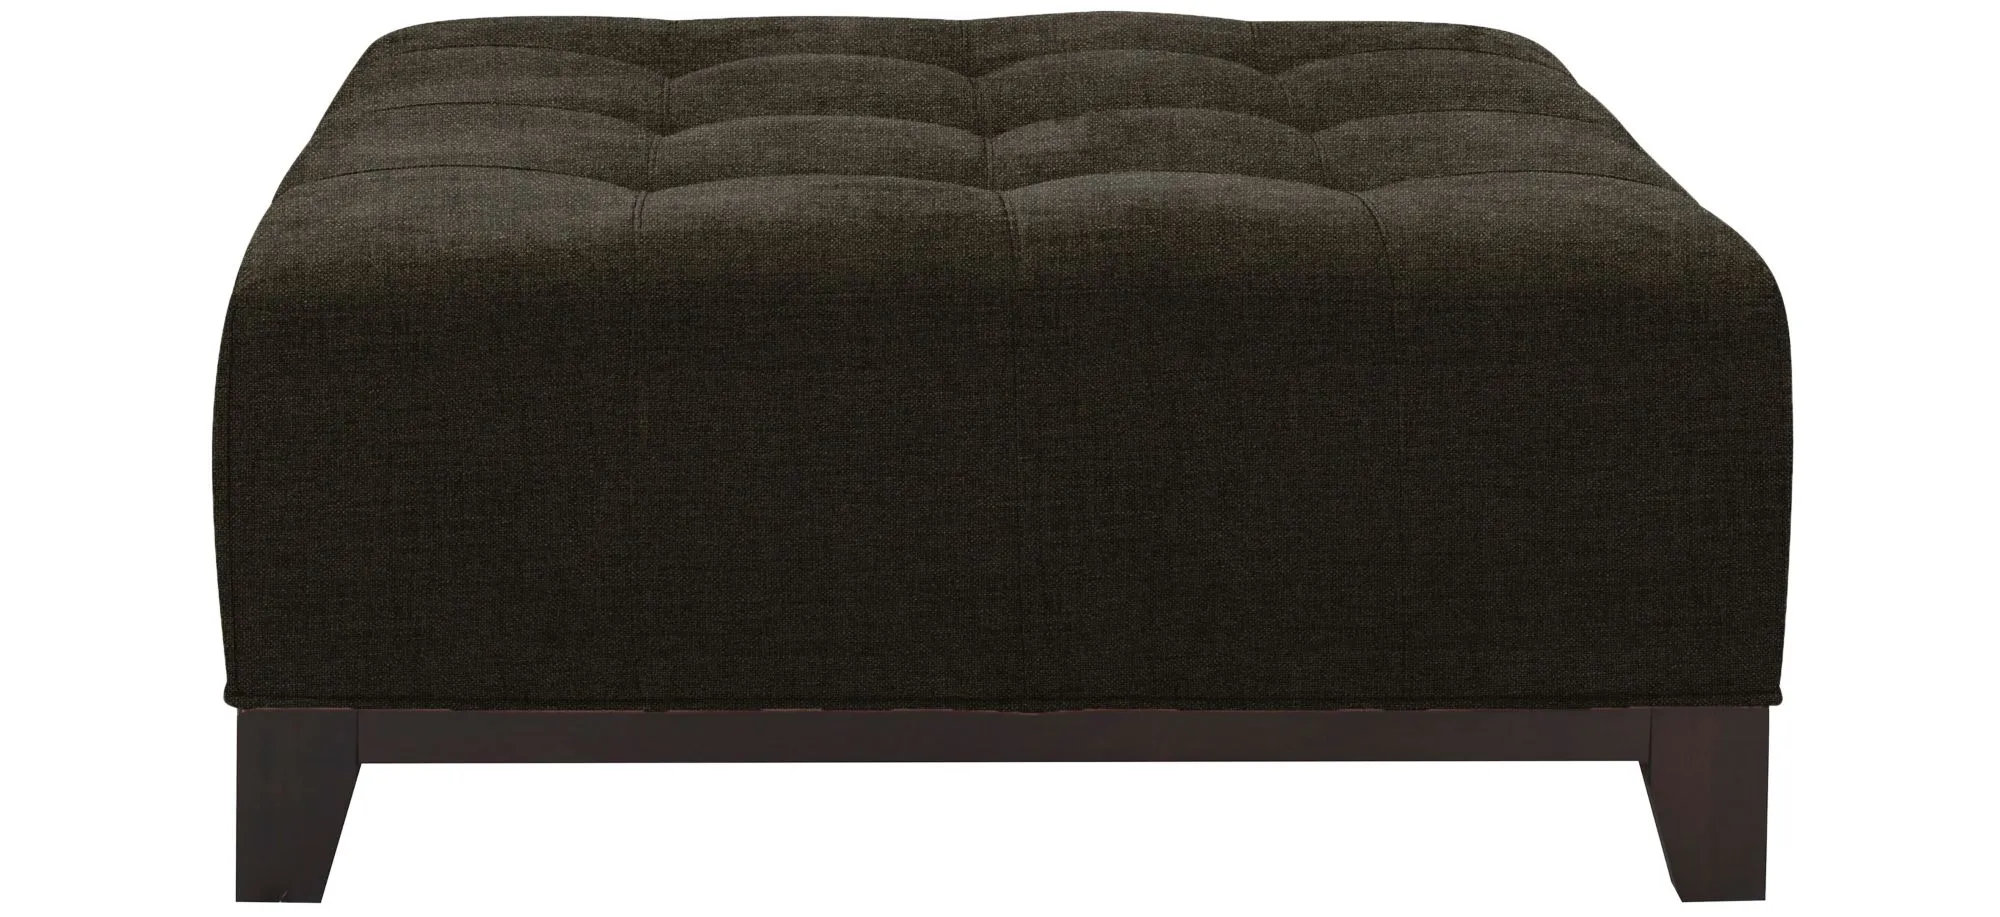 Cityscape Cocktail Ottoman in Santa Rosa Slate by H.M. Richards